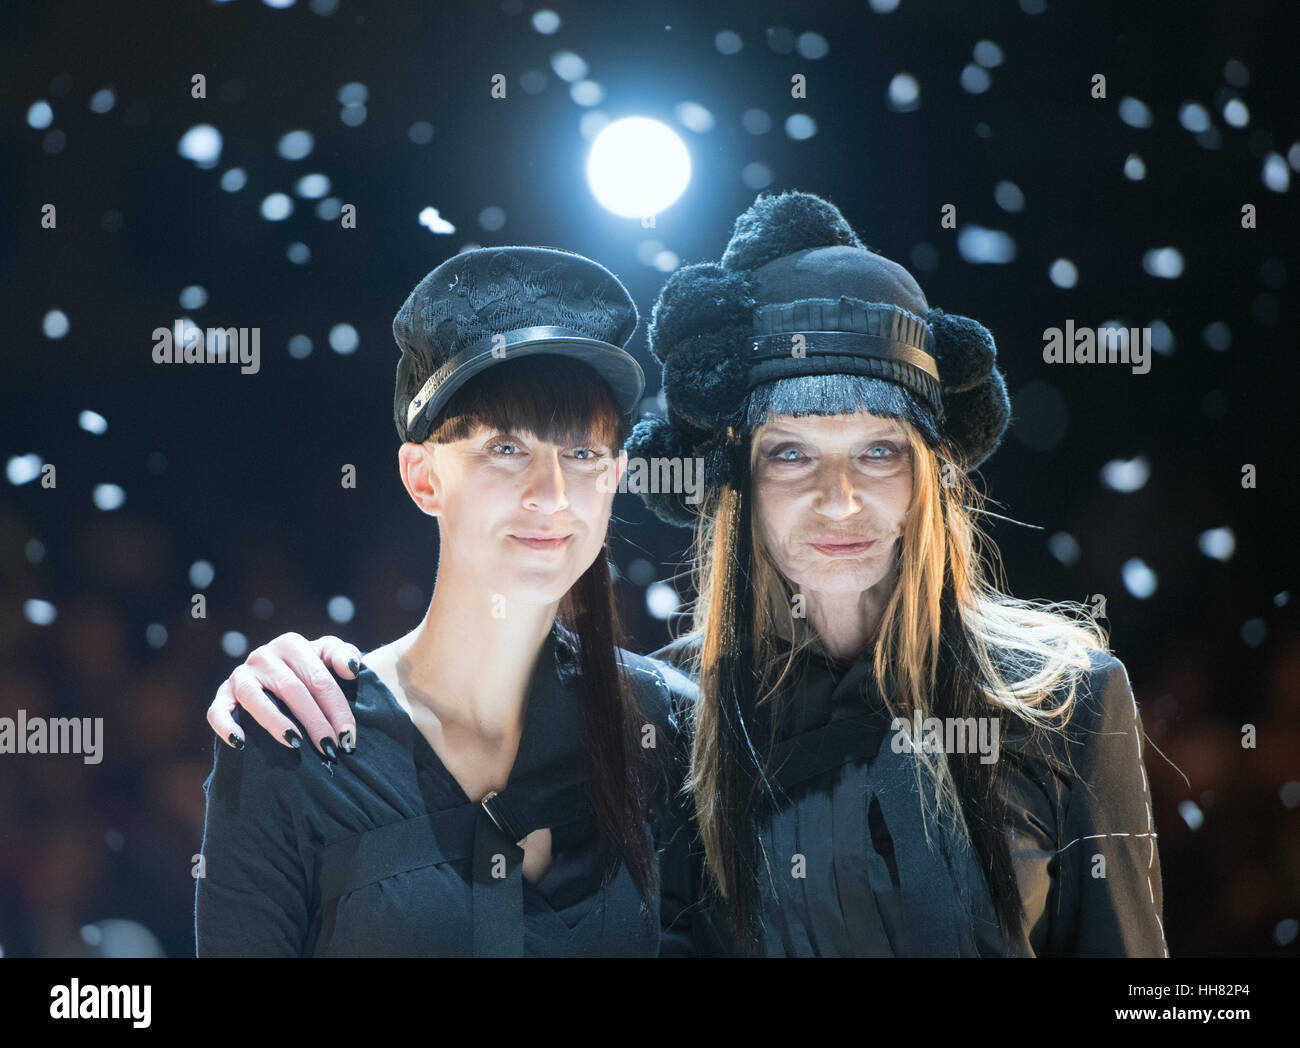 Berlin, Germany. 17th Jan, 2017. Actress Veruschka Graefin von Lehndorff (R) and Esther Perbandt standing on stage at the end of her show at Mercedes-Benz Fashion Week in Berlin, Germany, 17 January 2017. Credit: dpa picture alliance/Alamy Live News Stock Photo